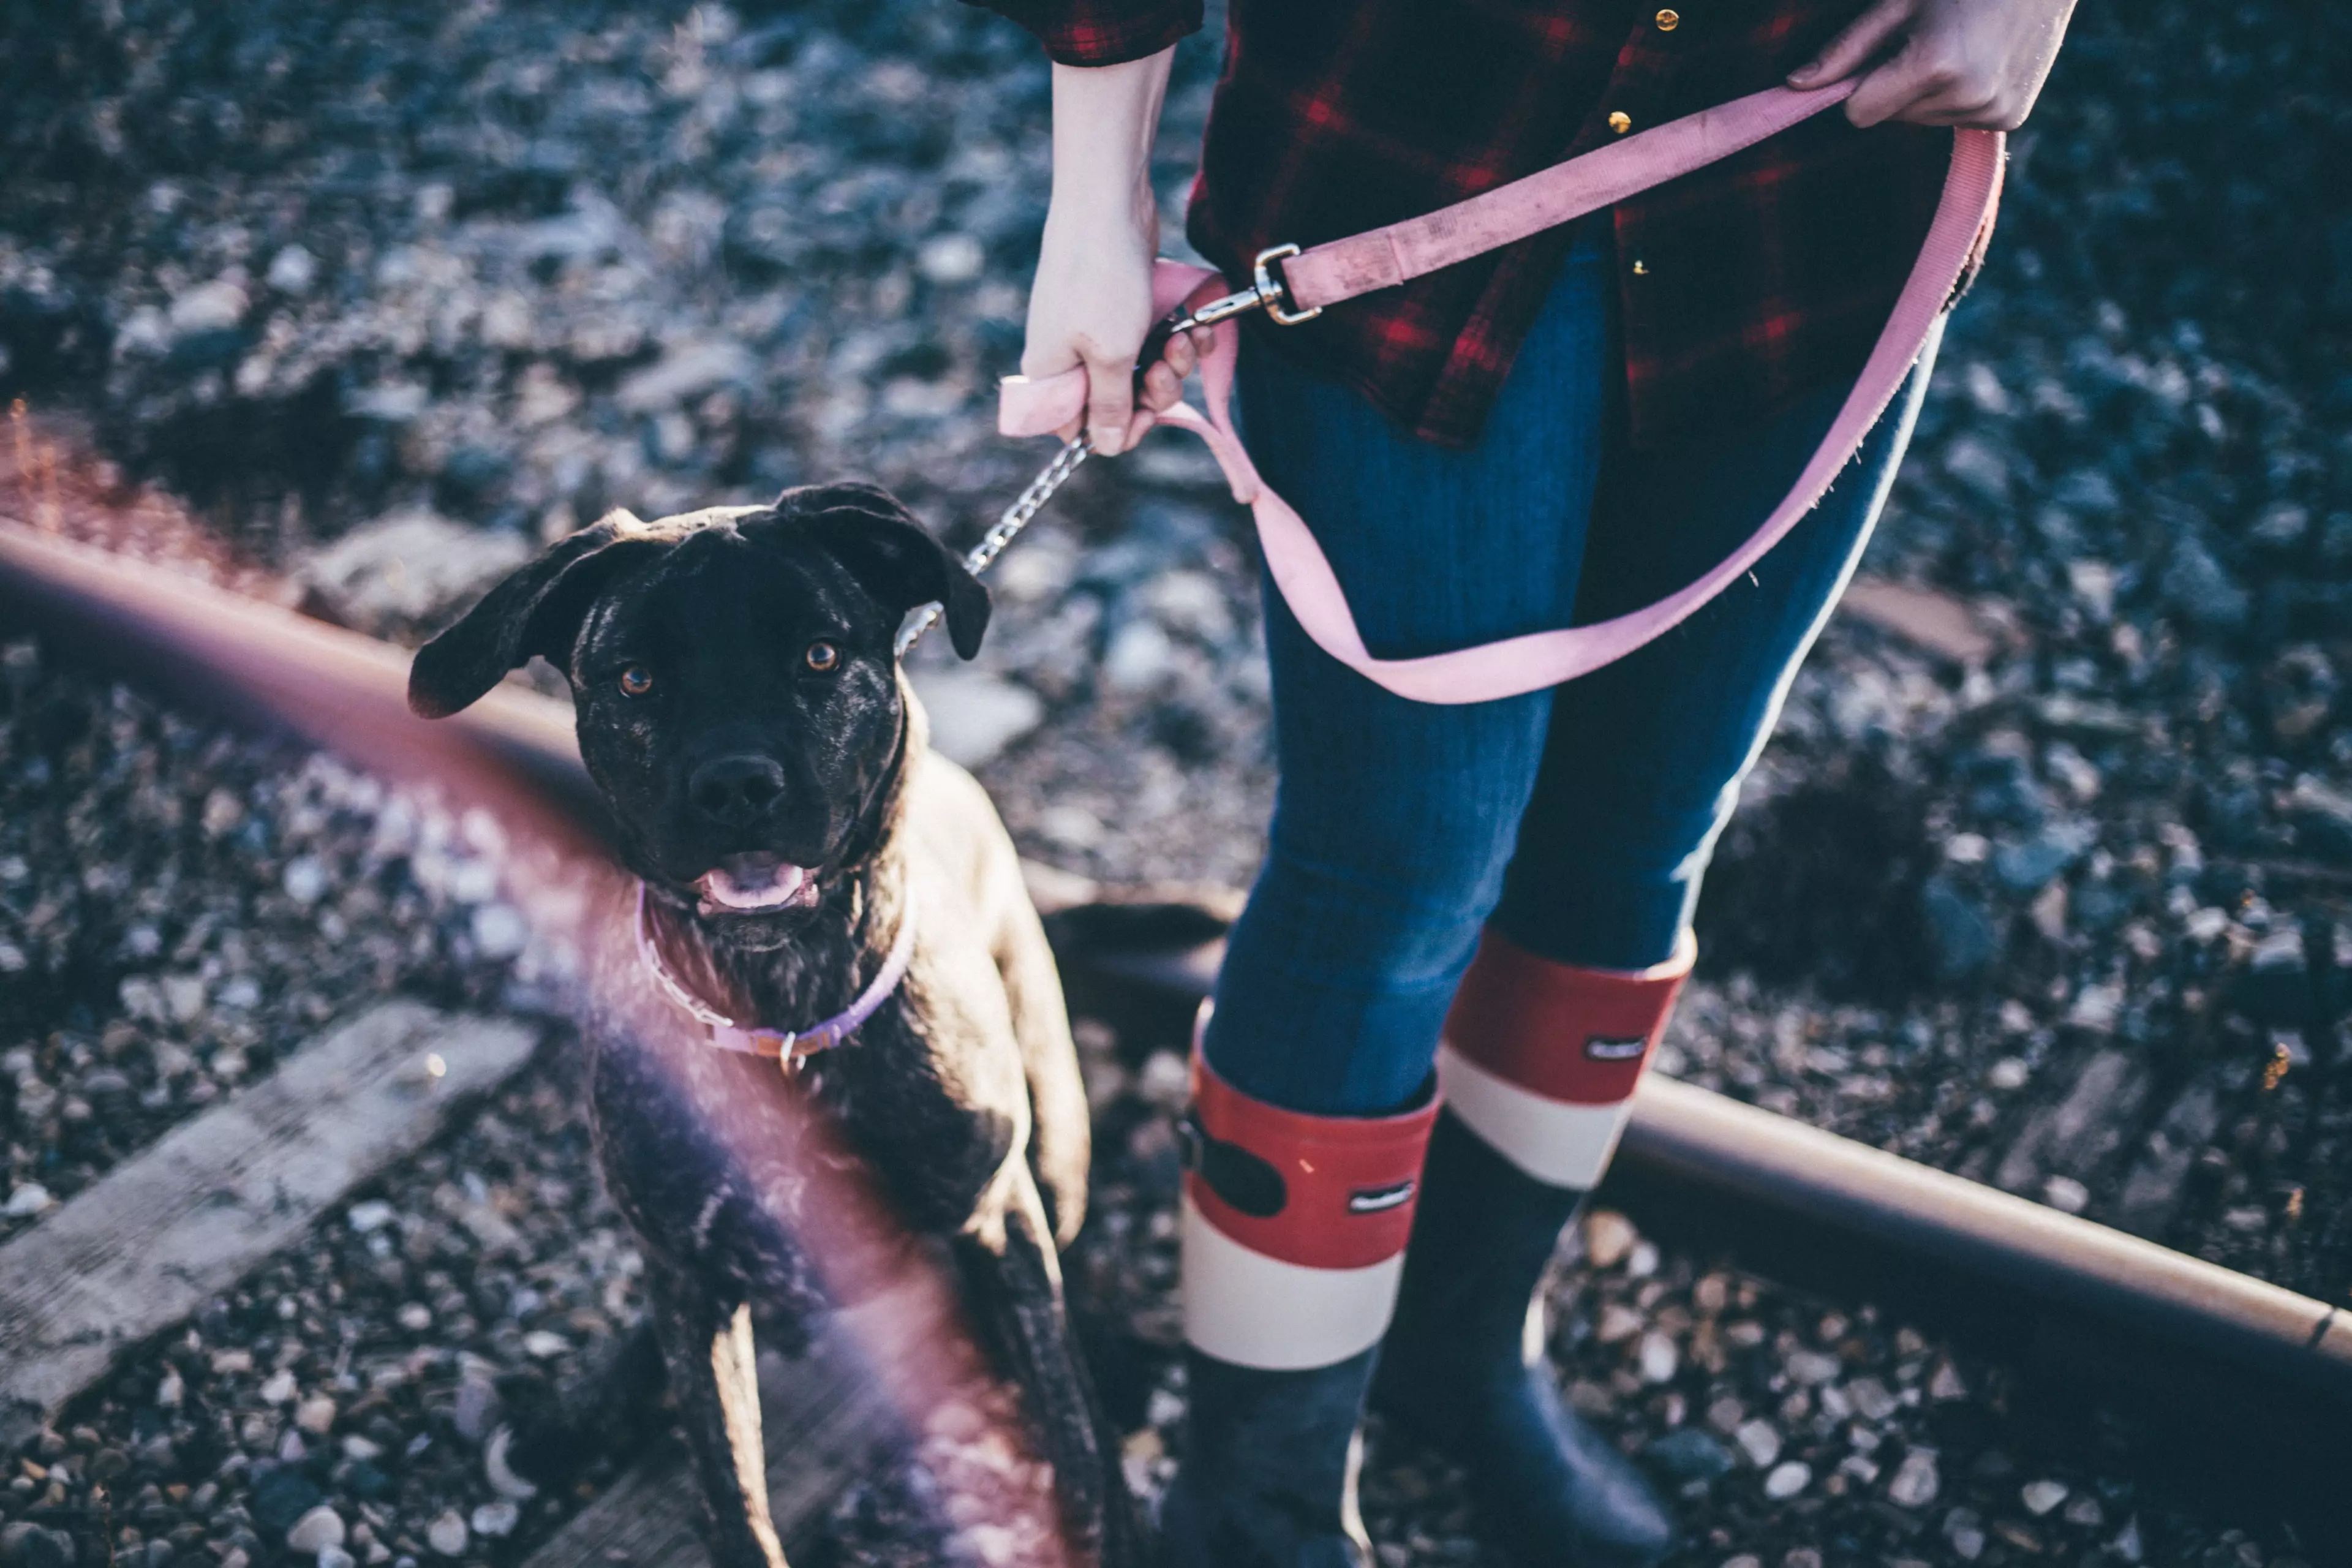 93 per cent of owners said they want to walk their dog more.